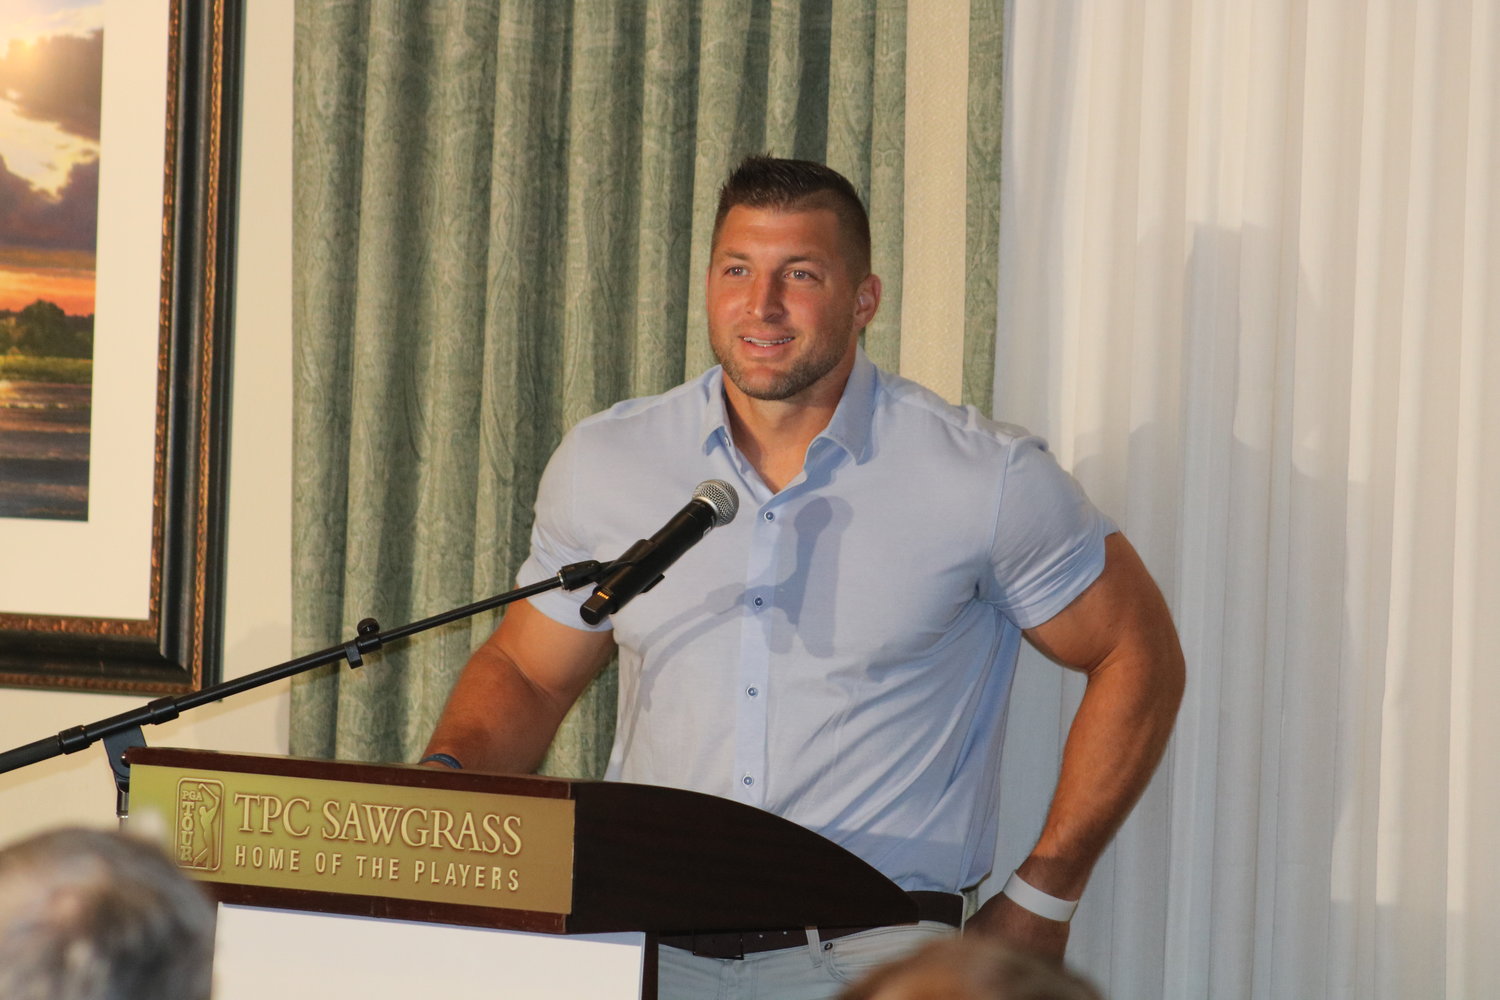 Local sports legend Tim Tebow is one of the founding owners of JAXUSL.